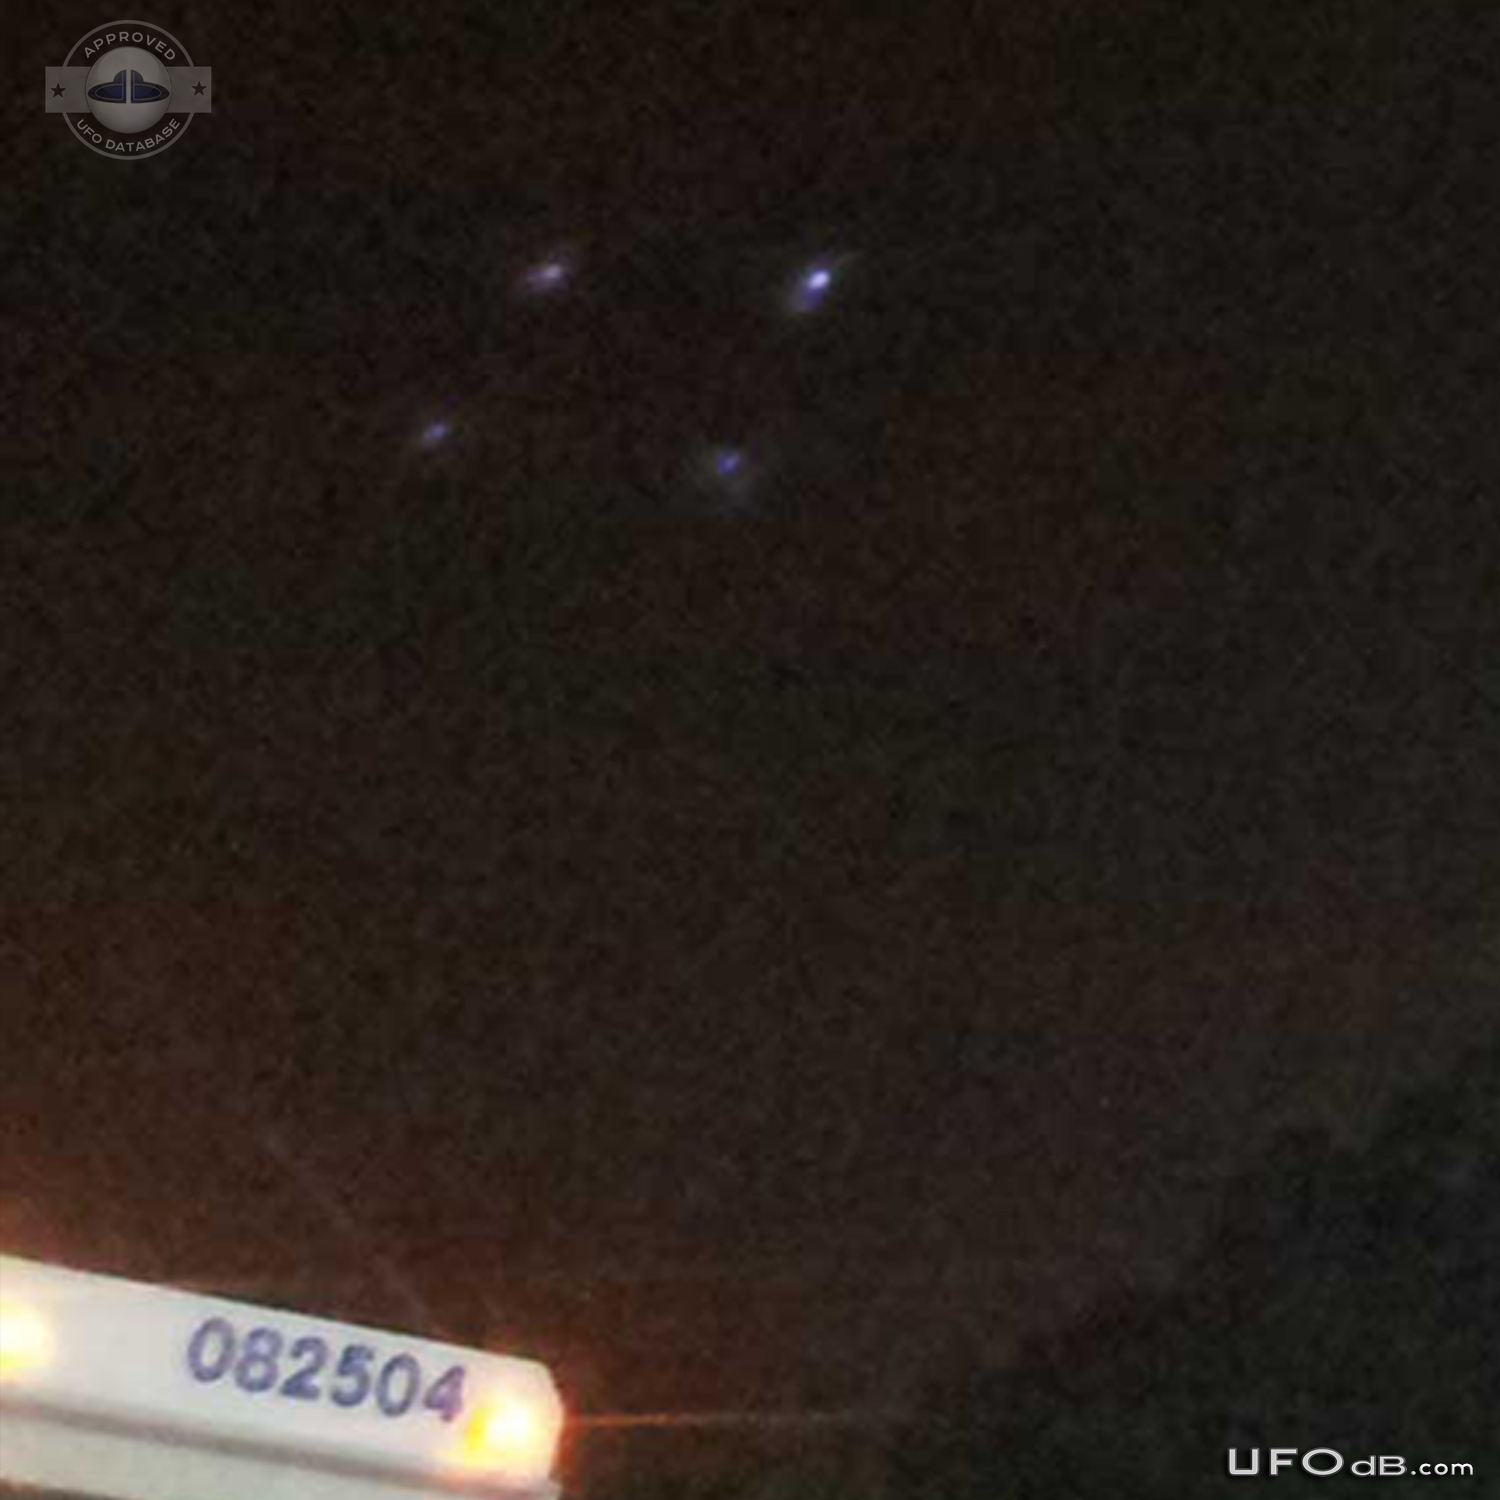 Square shaped UFO caught on picture during heavy rainfall - Rialto CA UFO Picture #384-7